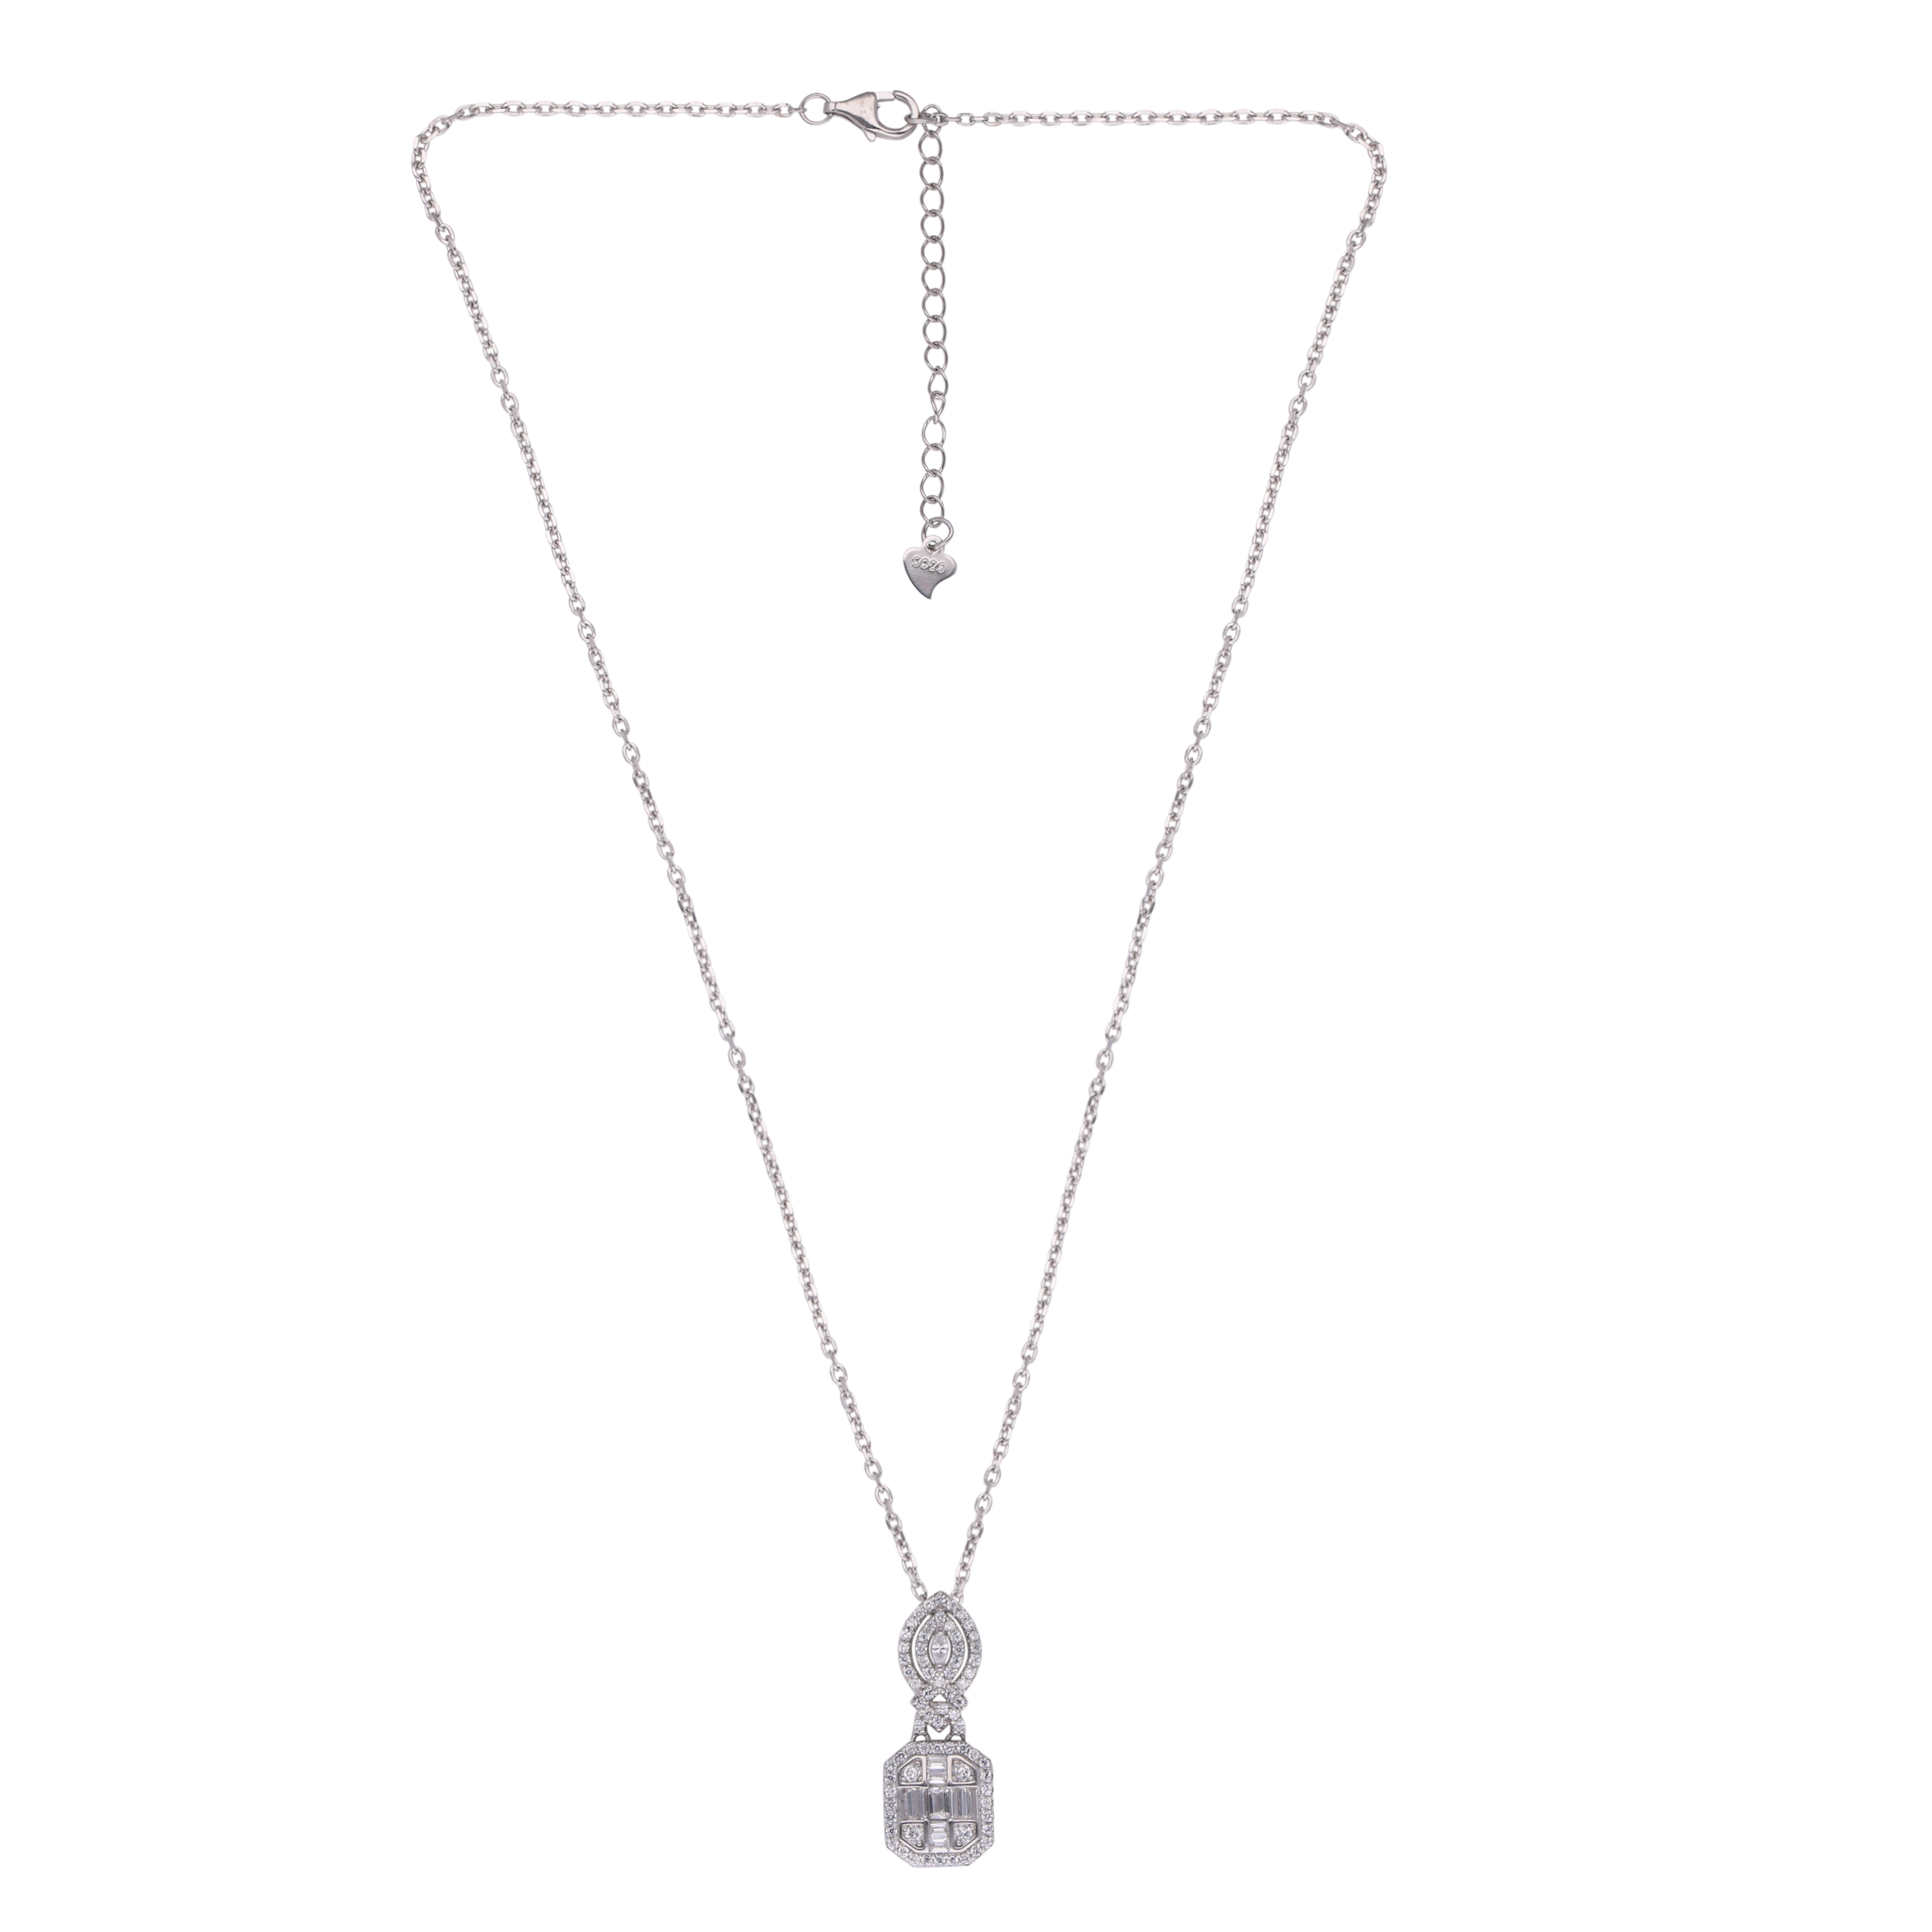 Radiant Drops" Sterling Silver Pendant Necklace | 0002984155, 0019257983